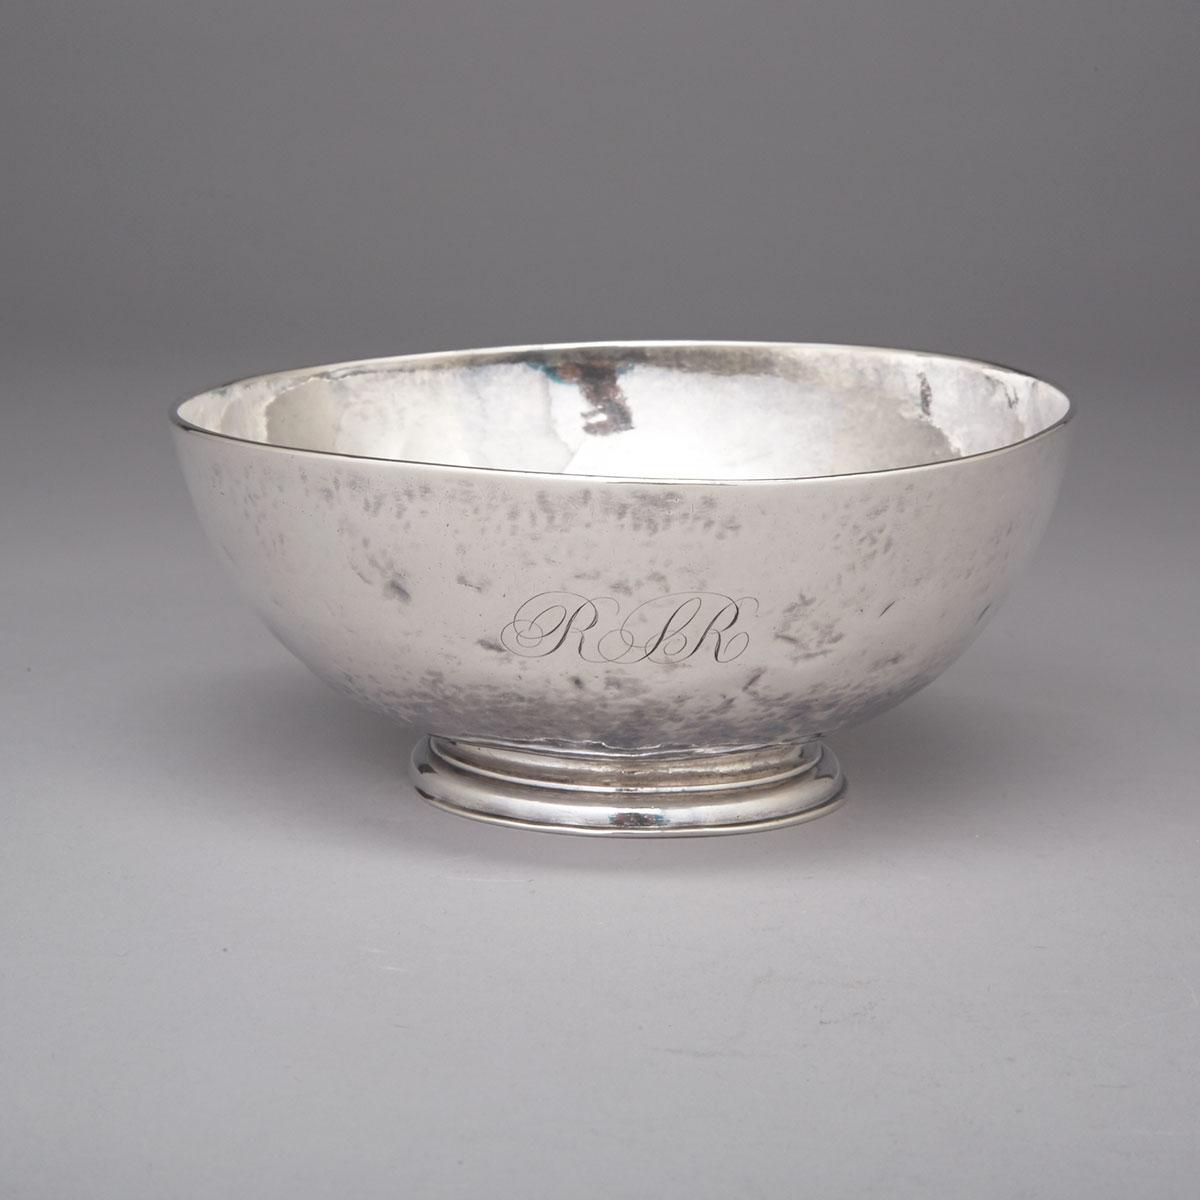 American Silver Bowl, late 18th/early 19th century